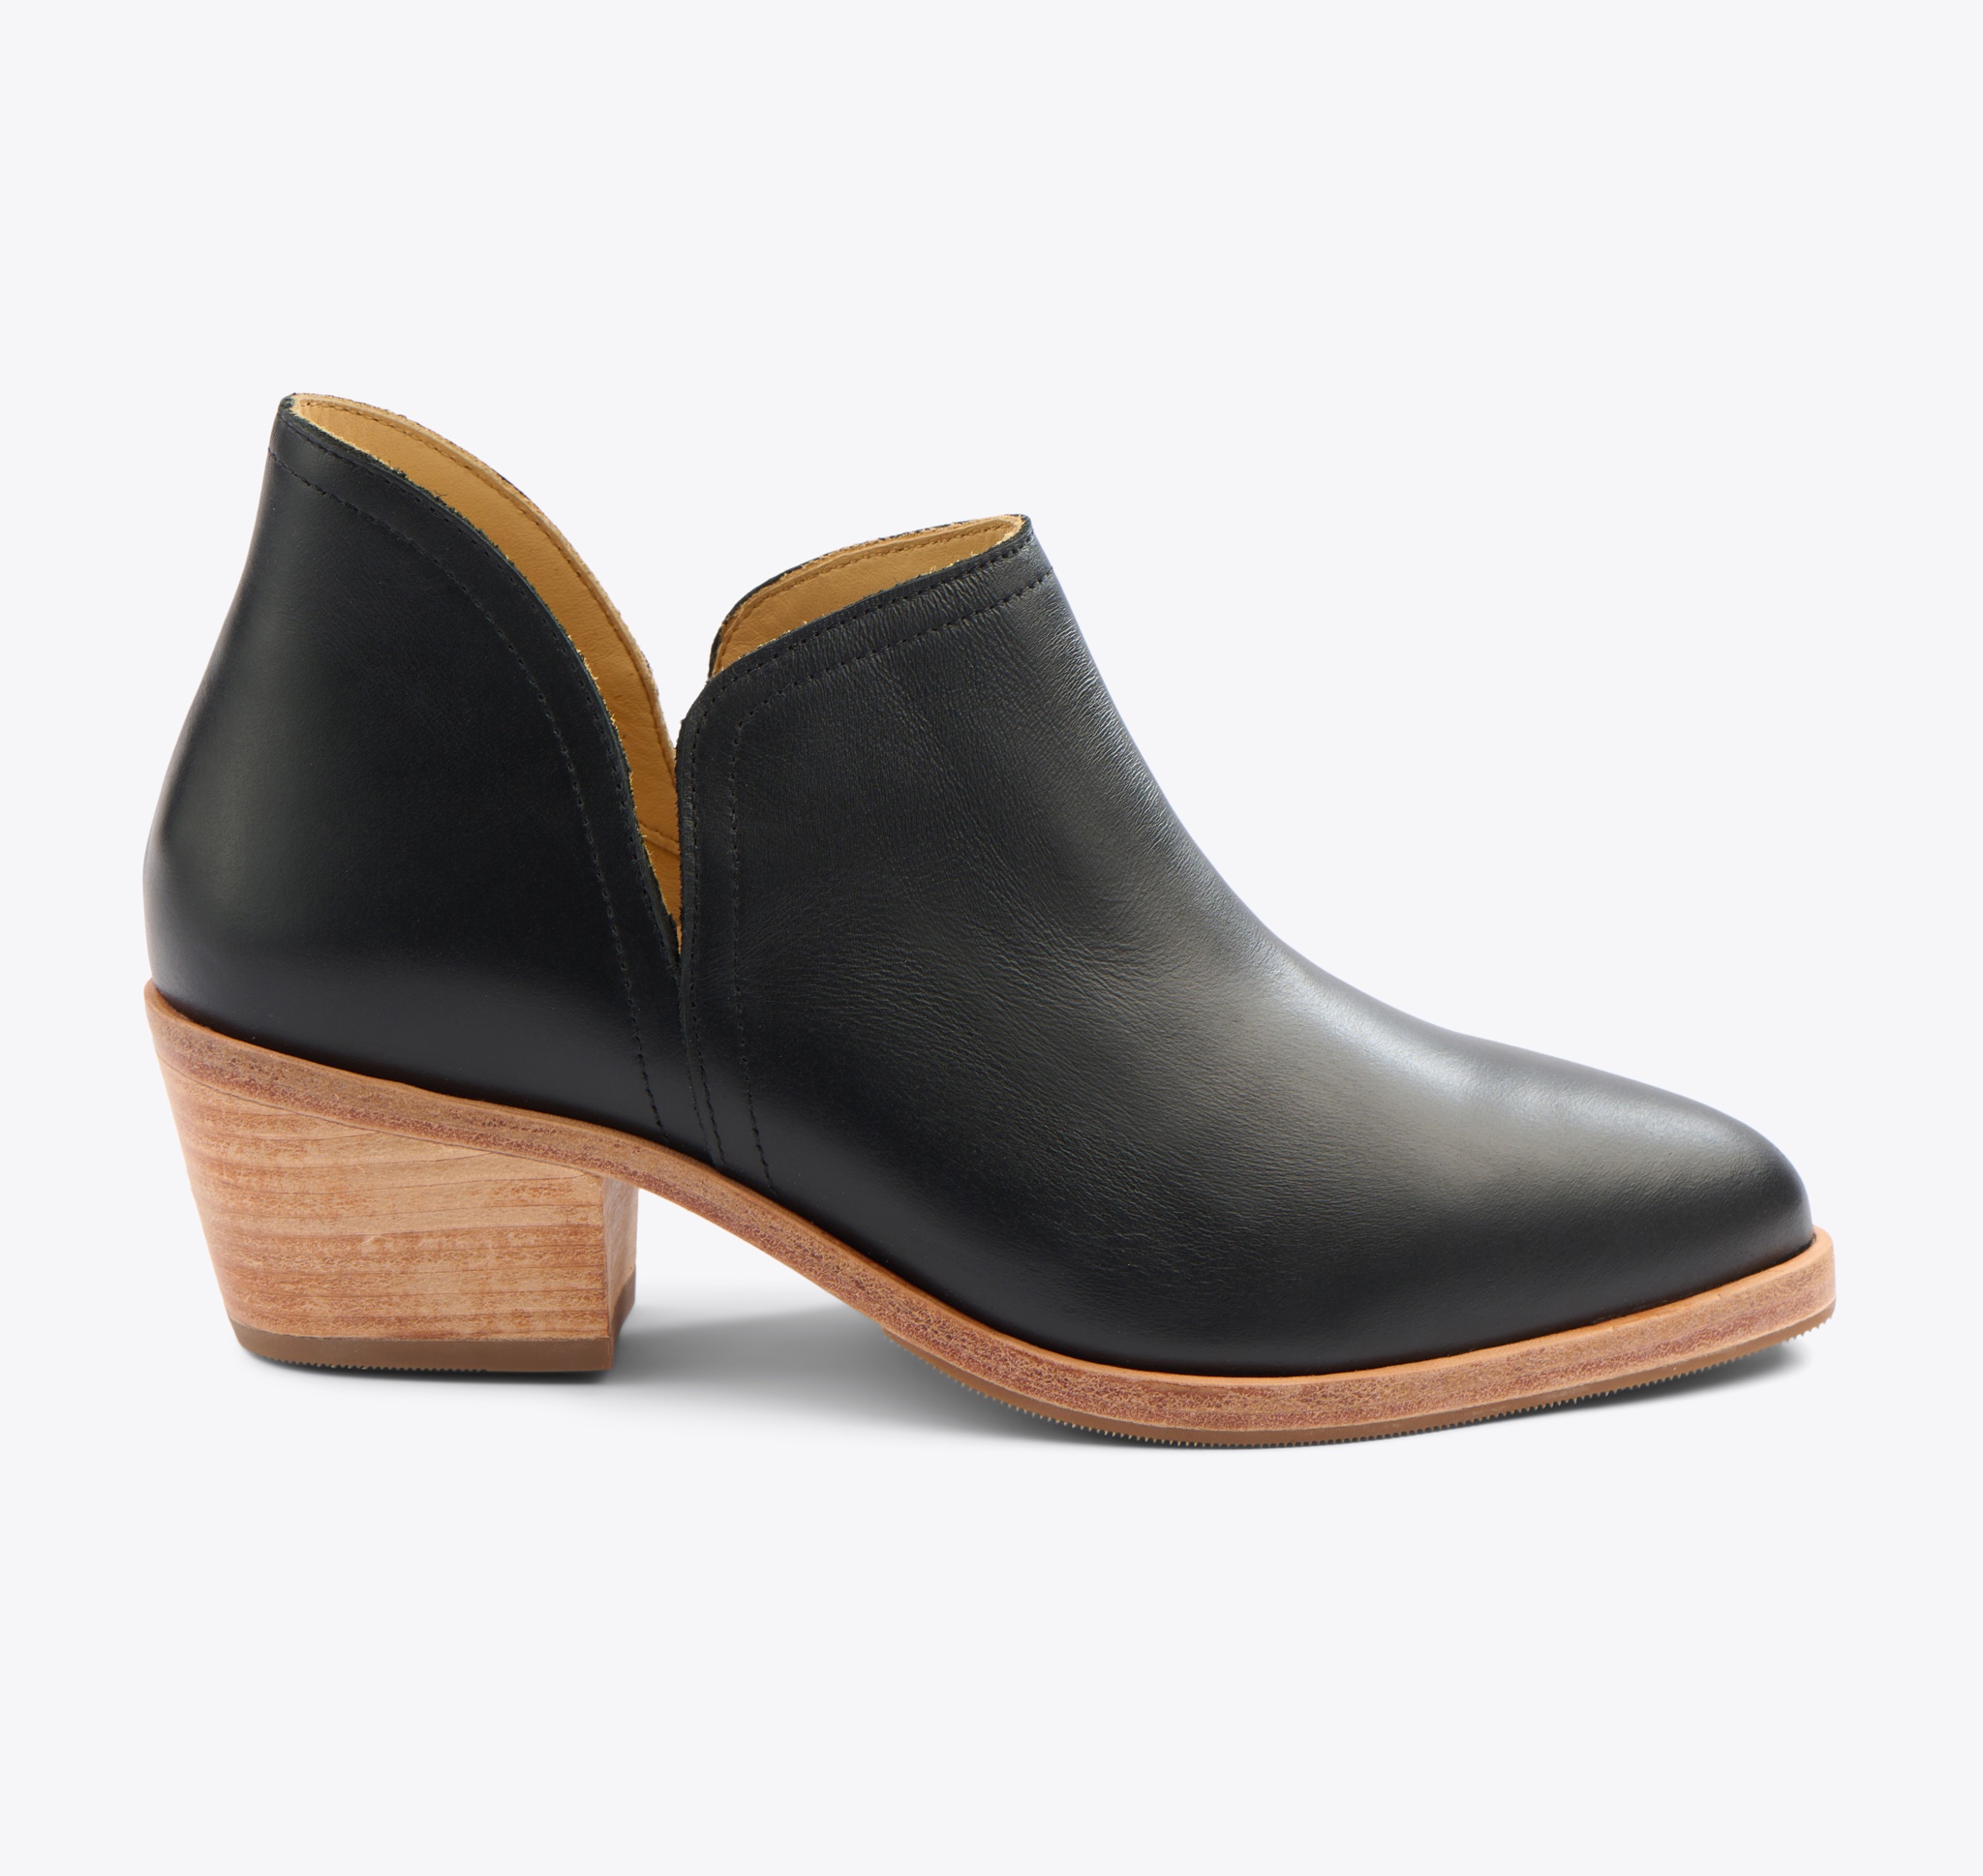 Nisolo Classic Ankle Bootie Black - Every Nisolo product is built on the foundation of comfort, function, and design. 